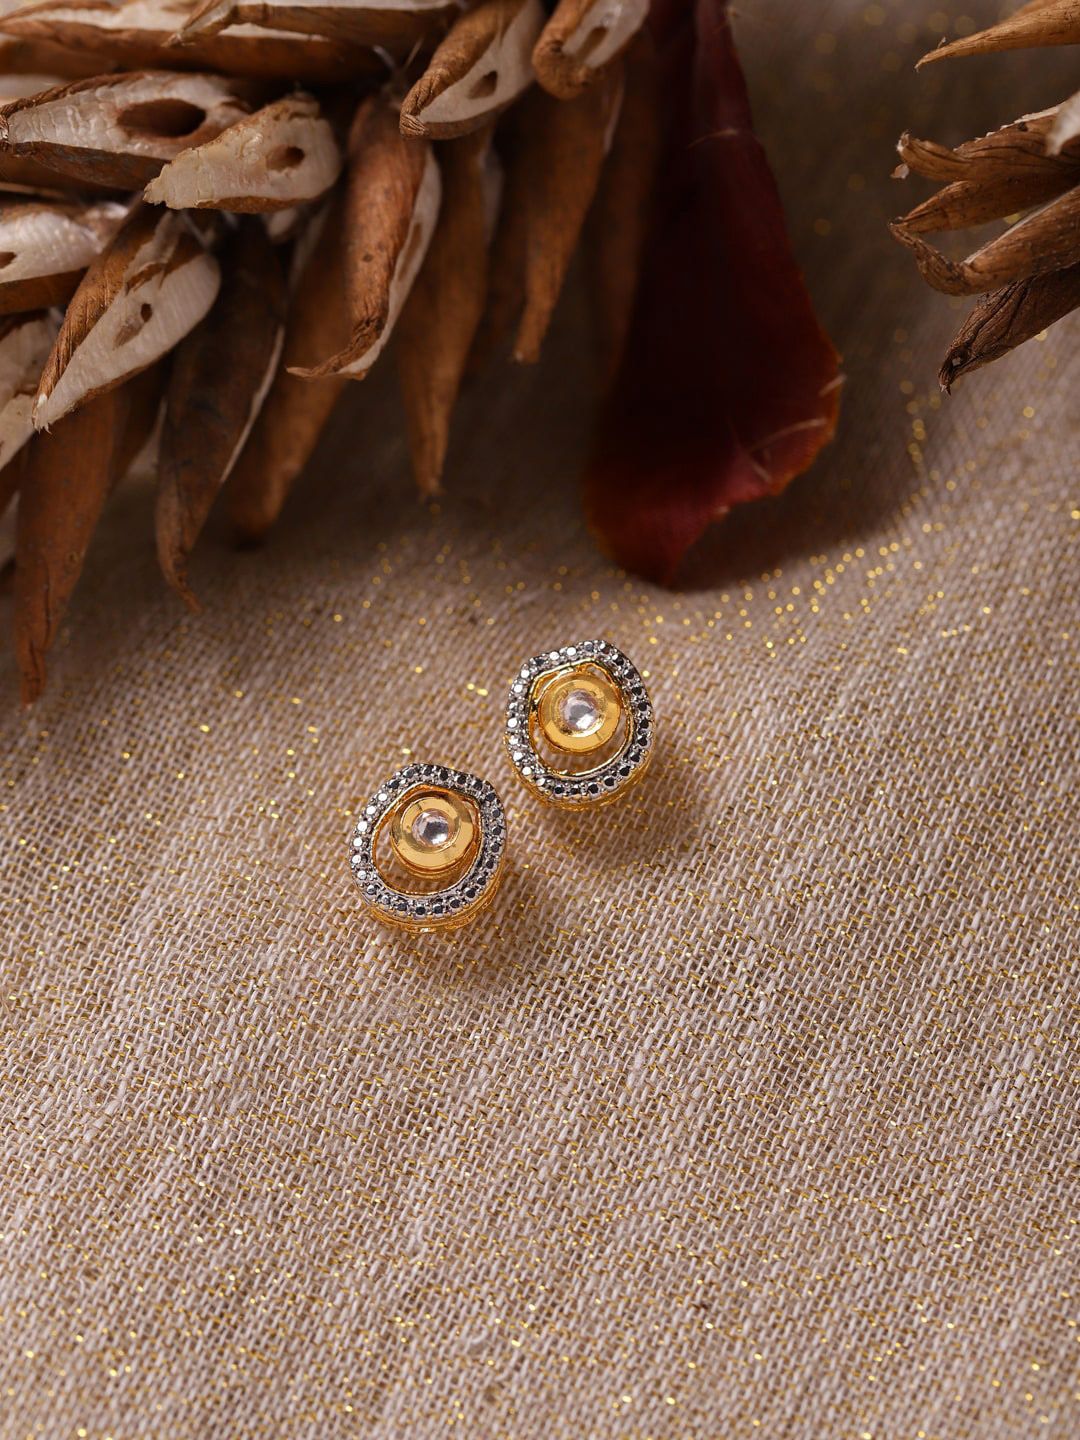 Ruby Raang Gold-Plated White Kundan Studded Circular Studs Earrings Price in India